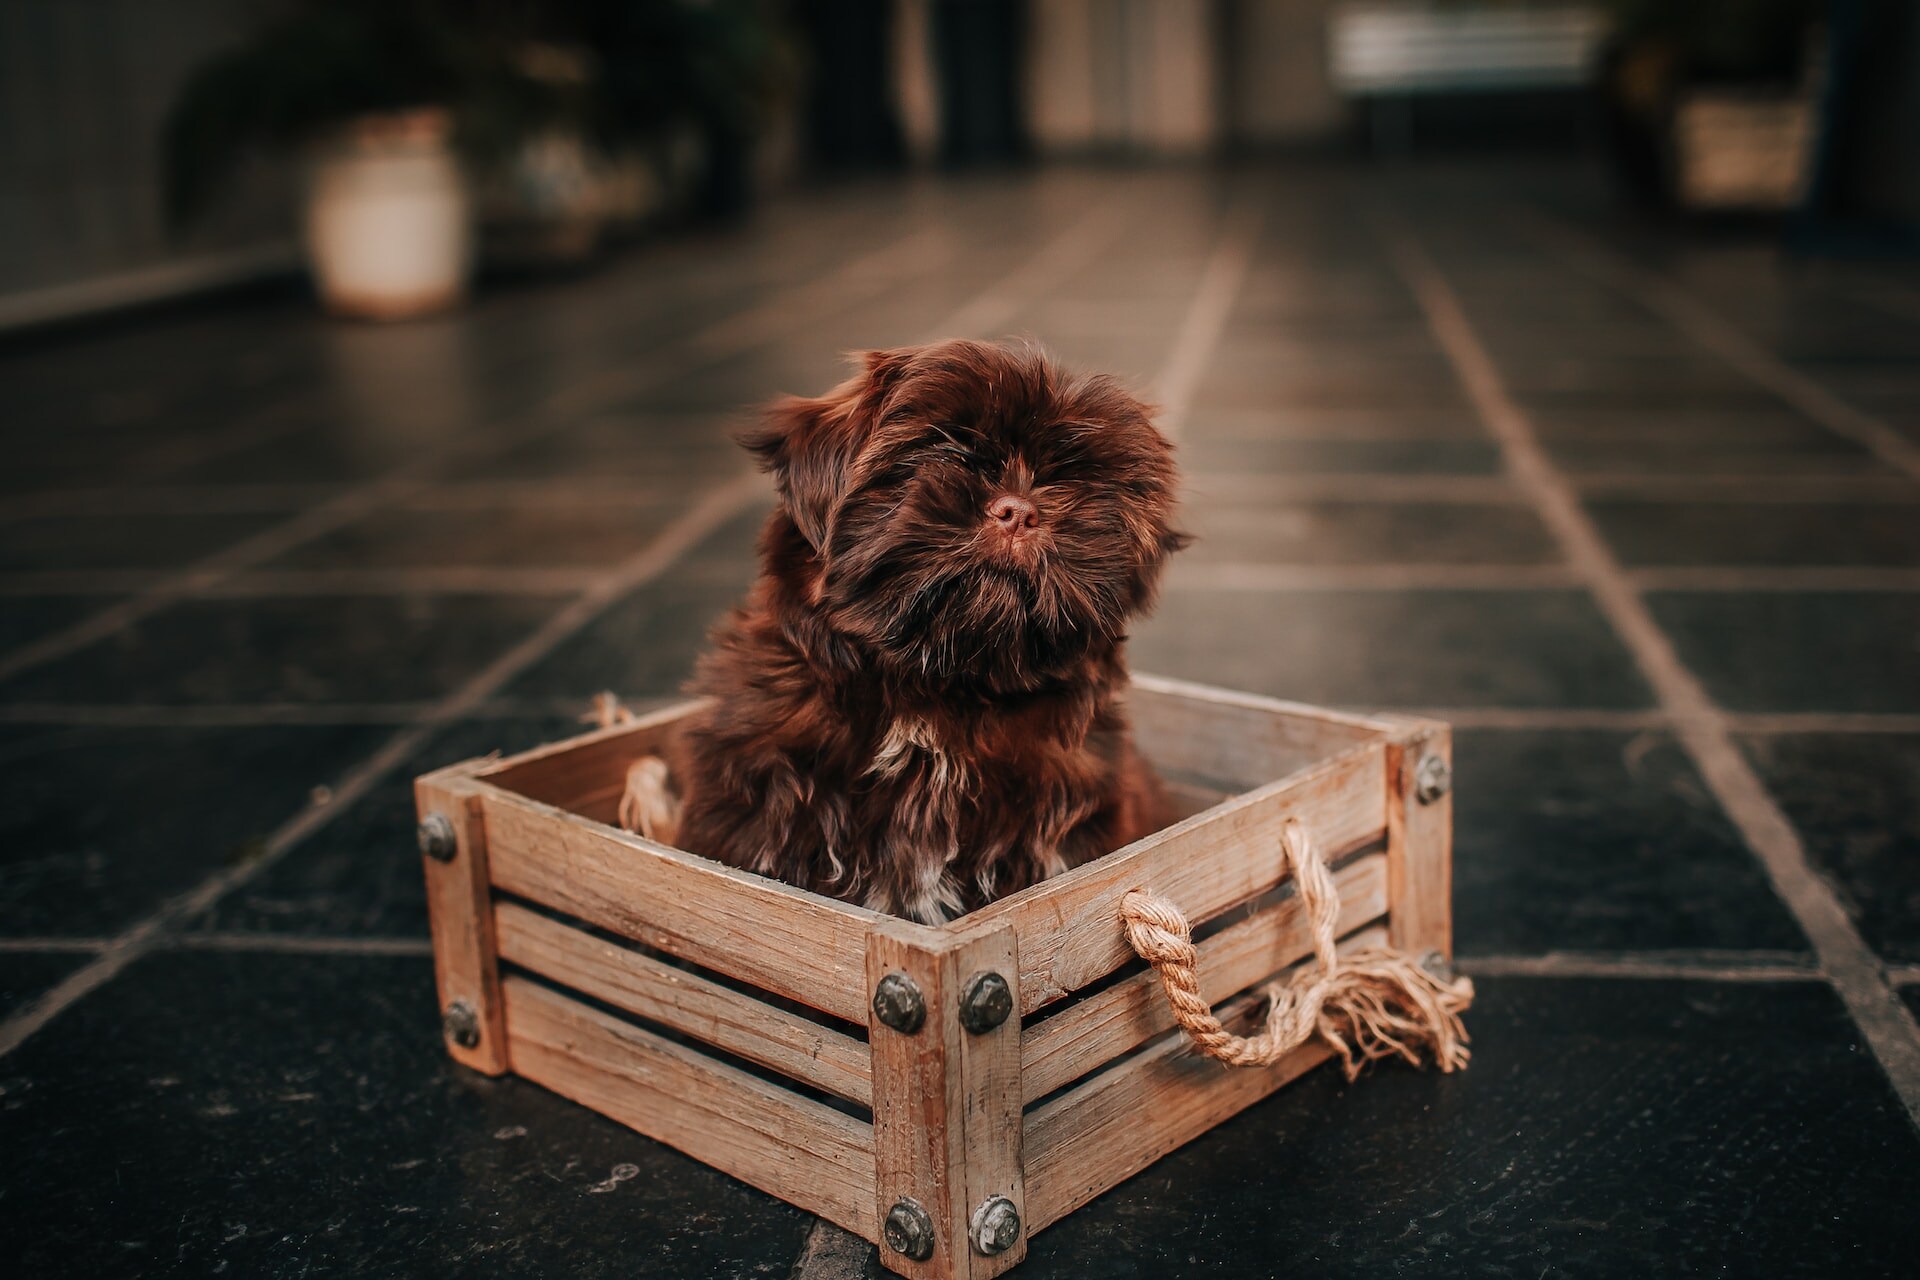 A small brown dog sitting inside a wooden crate indoors